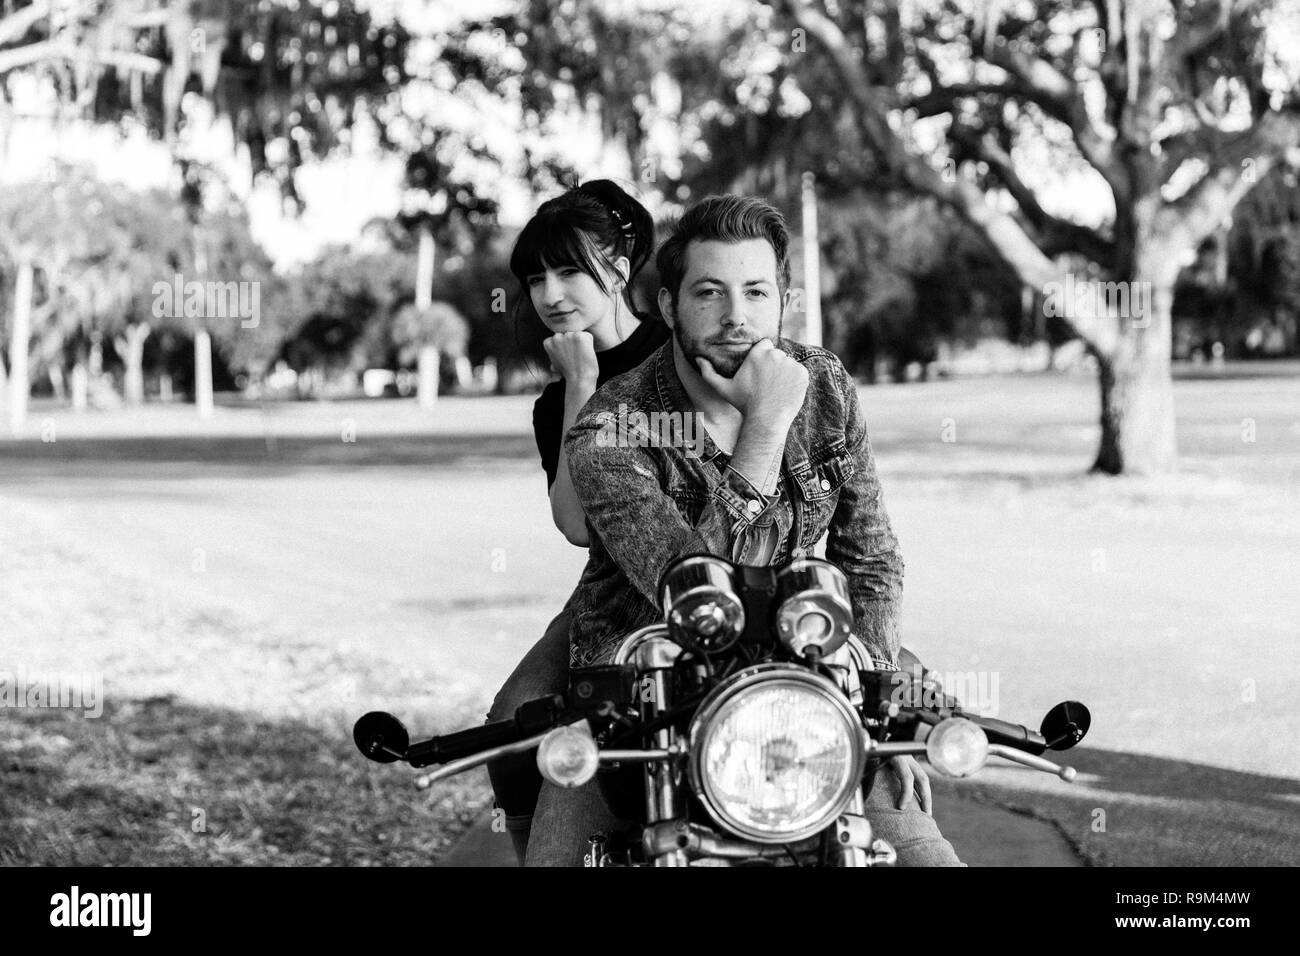 Portrait of Attractive Good Looking Young Modern Trendy Fashionable Guy Girl Couple Riding on Green Motorcycle Cruiser Classic Bike in Love Stock Photo